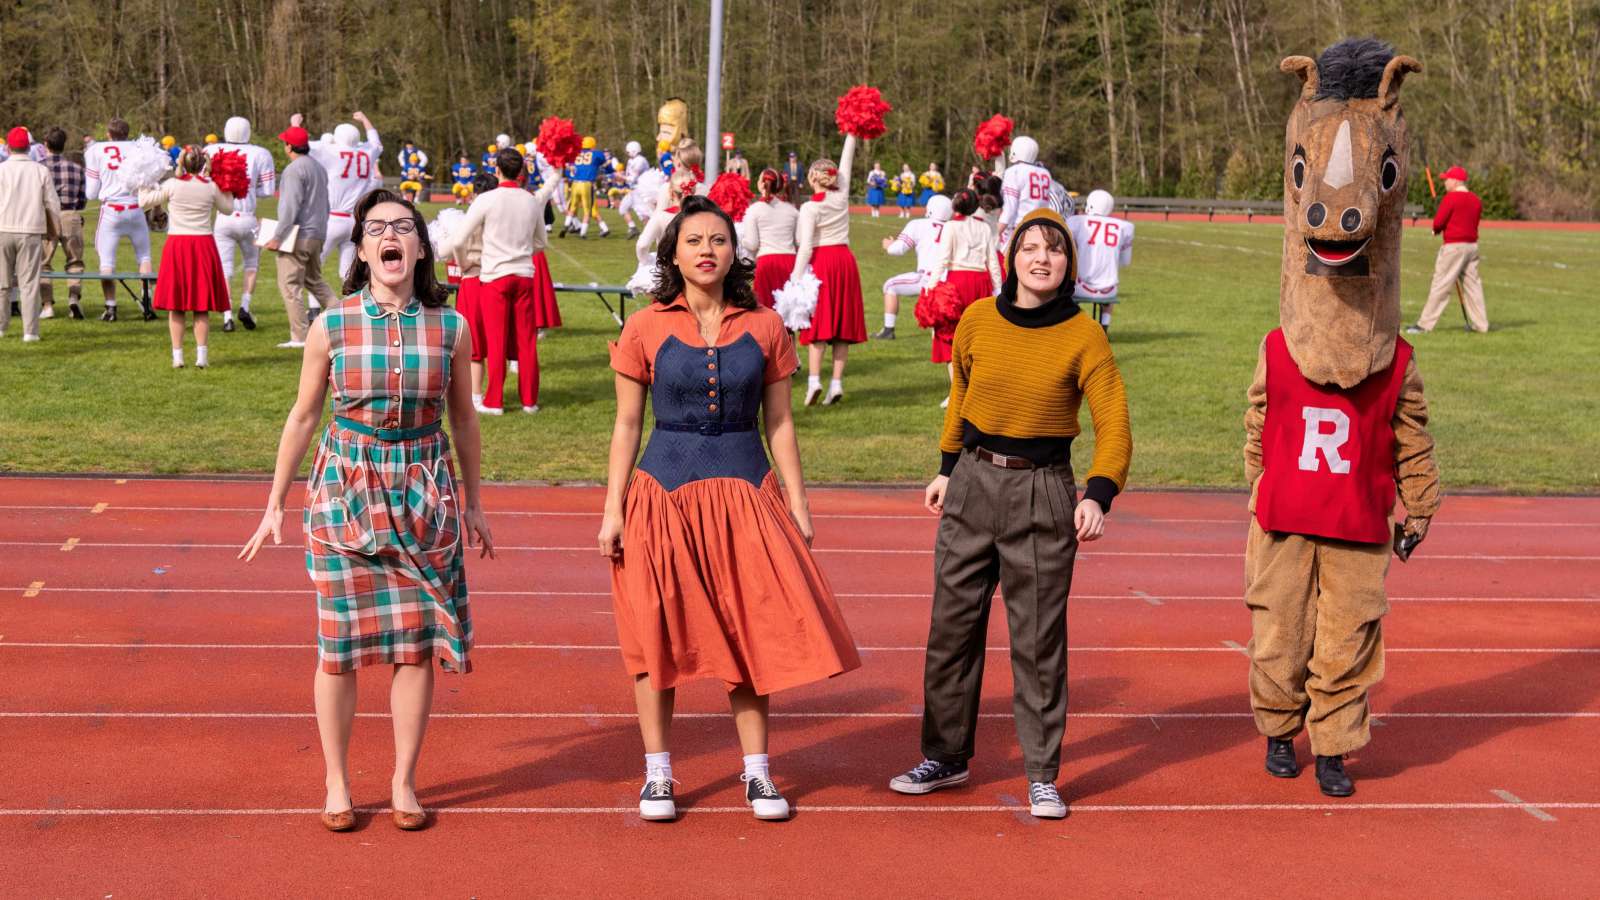 Grease: Rise of the Pink Ladies : If You Can't Be an Athlete, Be an Athletic Supporter